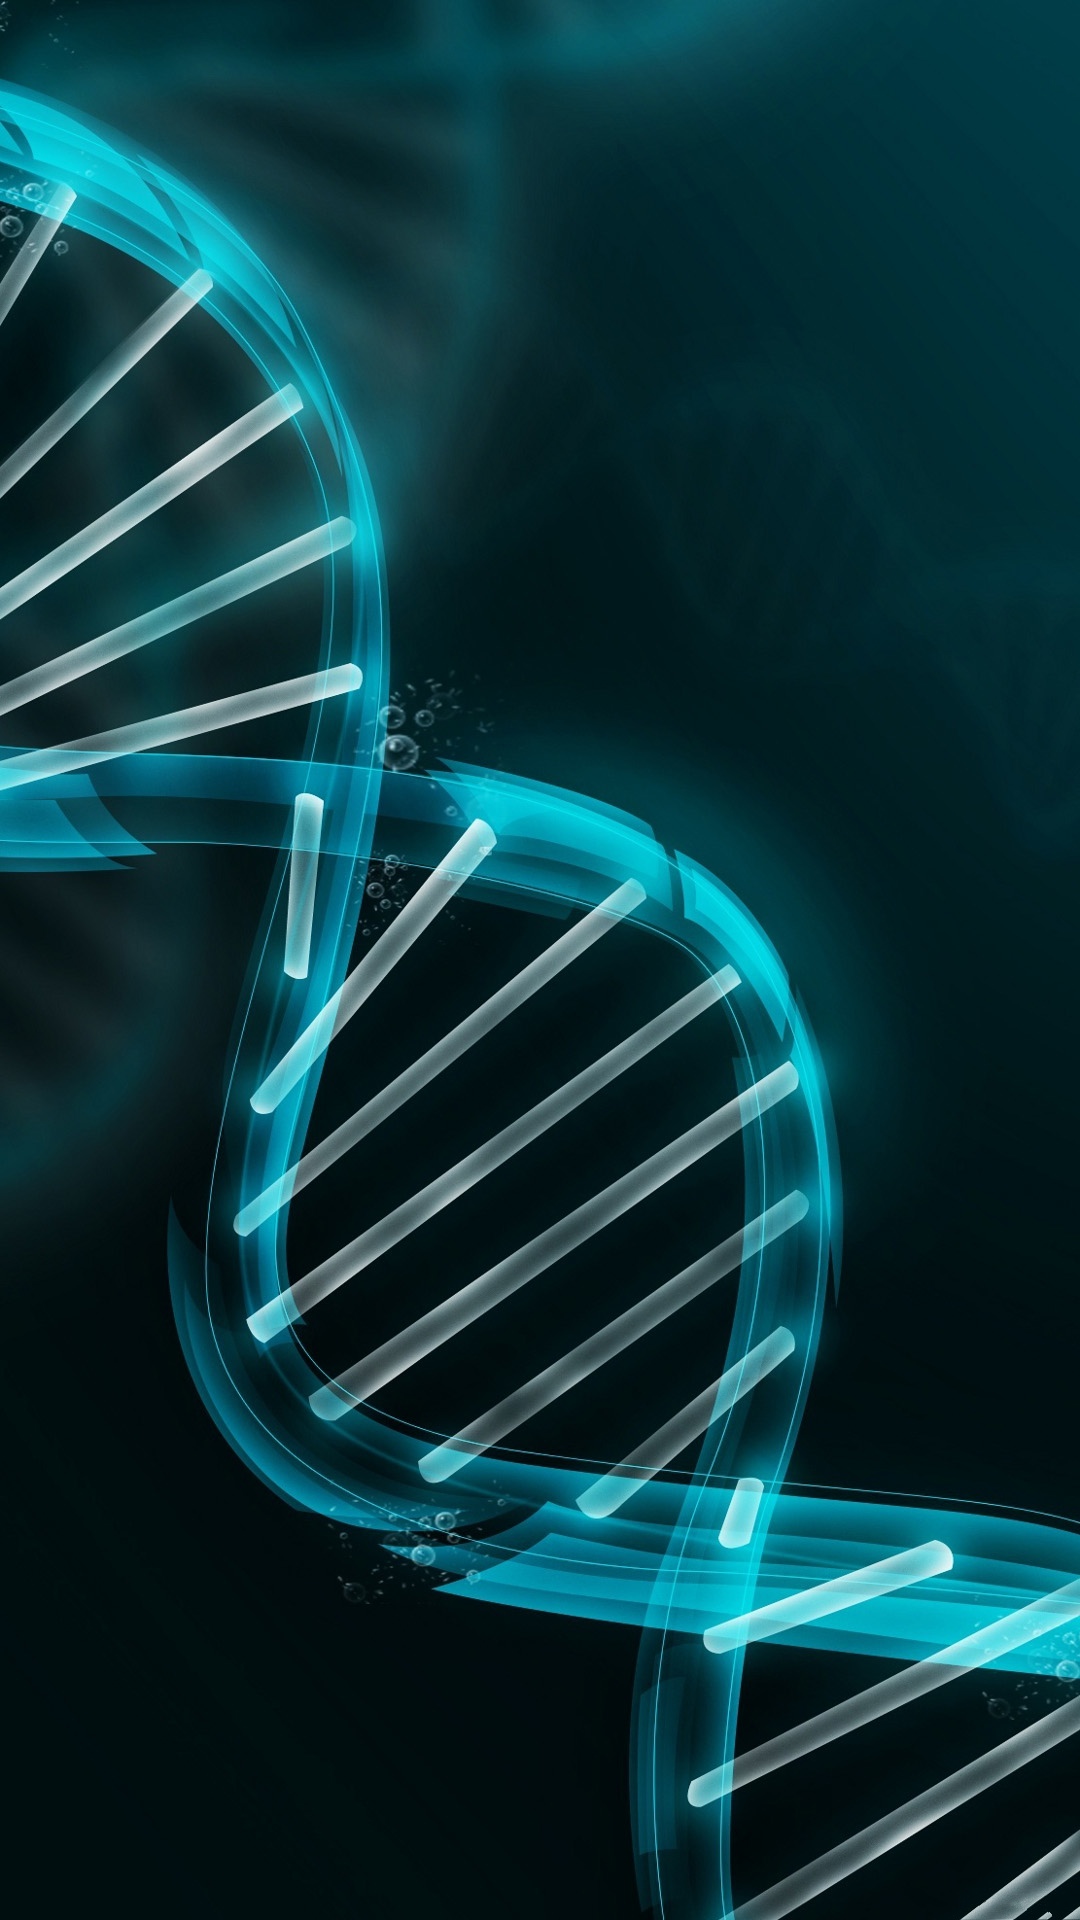 3D DNA illustration - Best htc one wallpapers